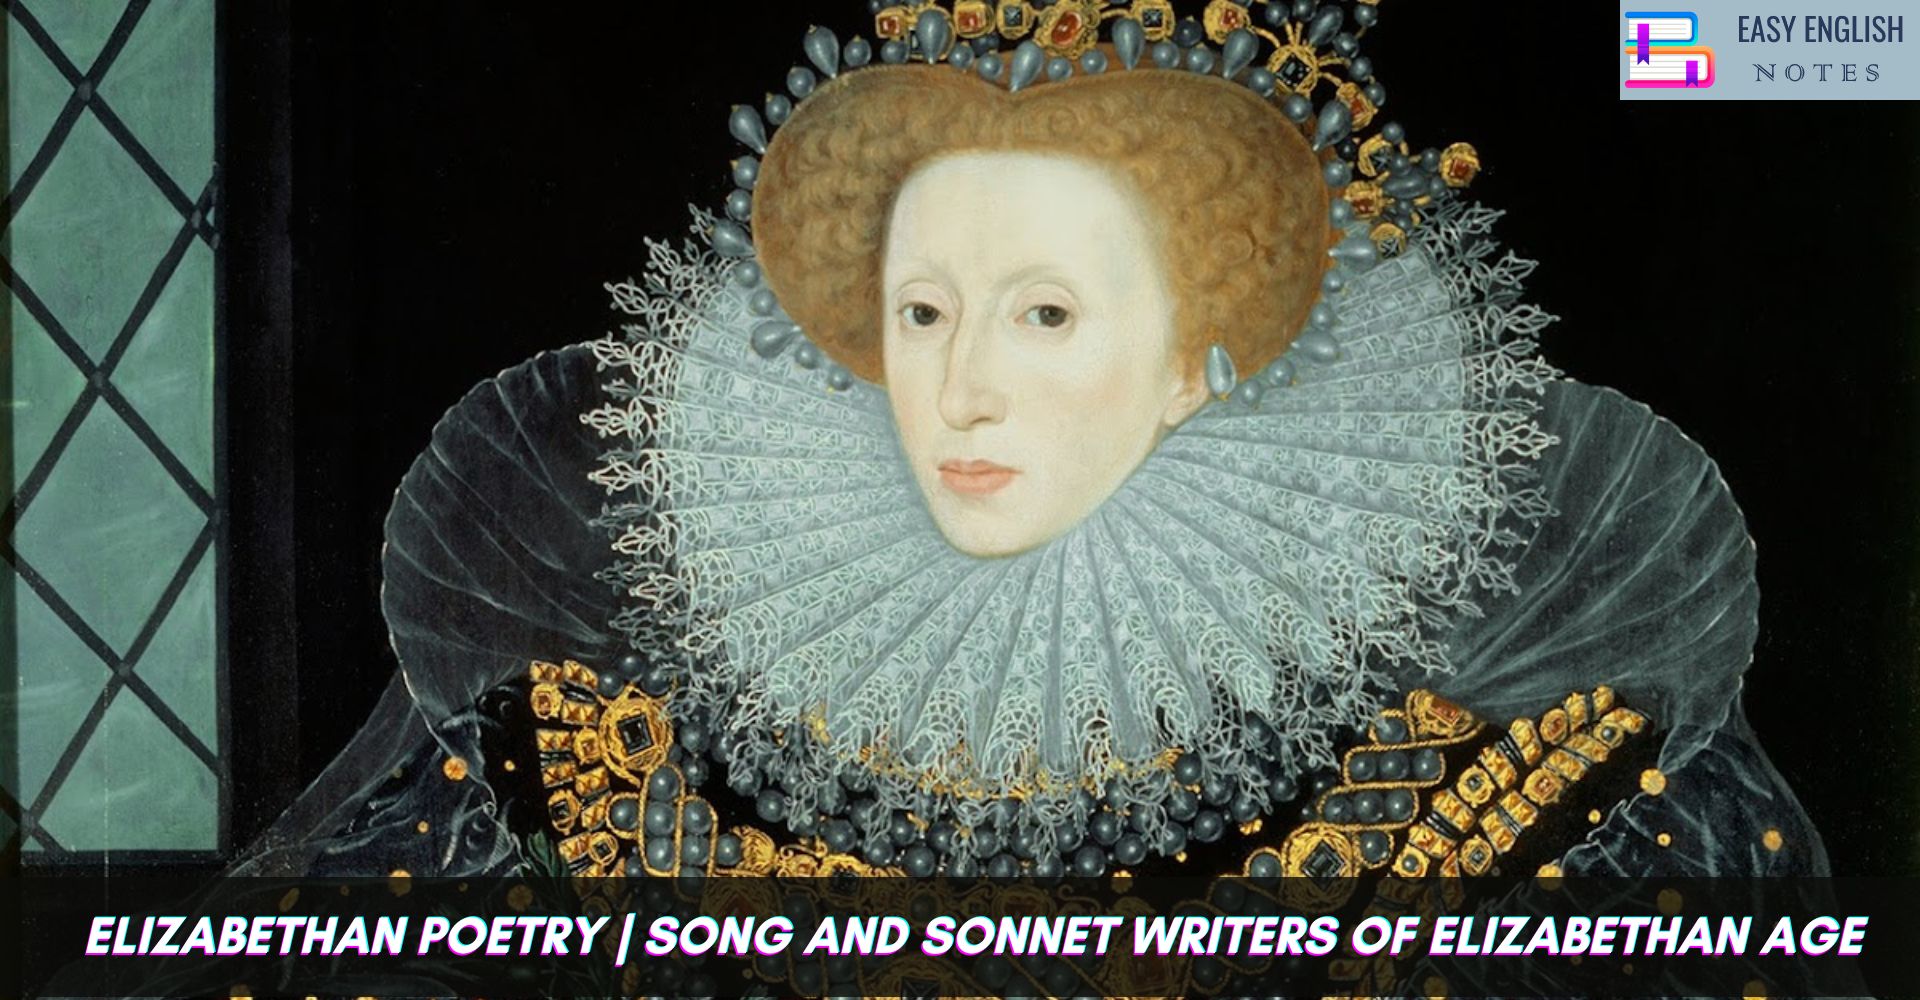 Elizabethan Poetry | Song and Sonnet Writers of Elizabethan Age